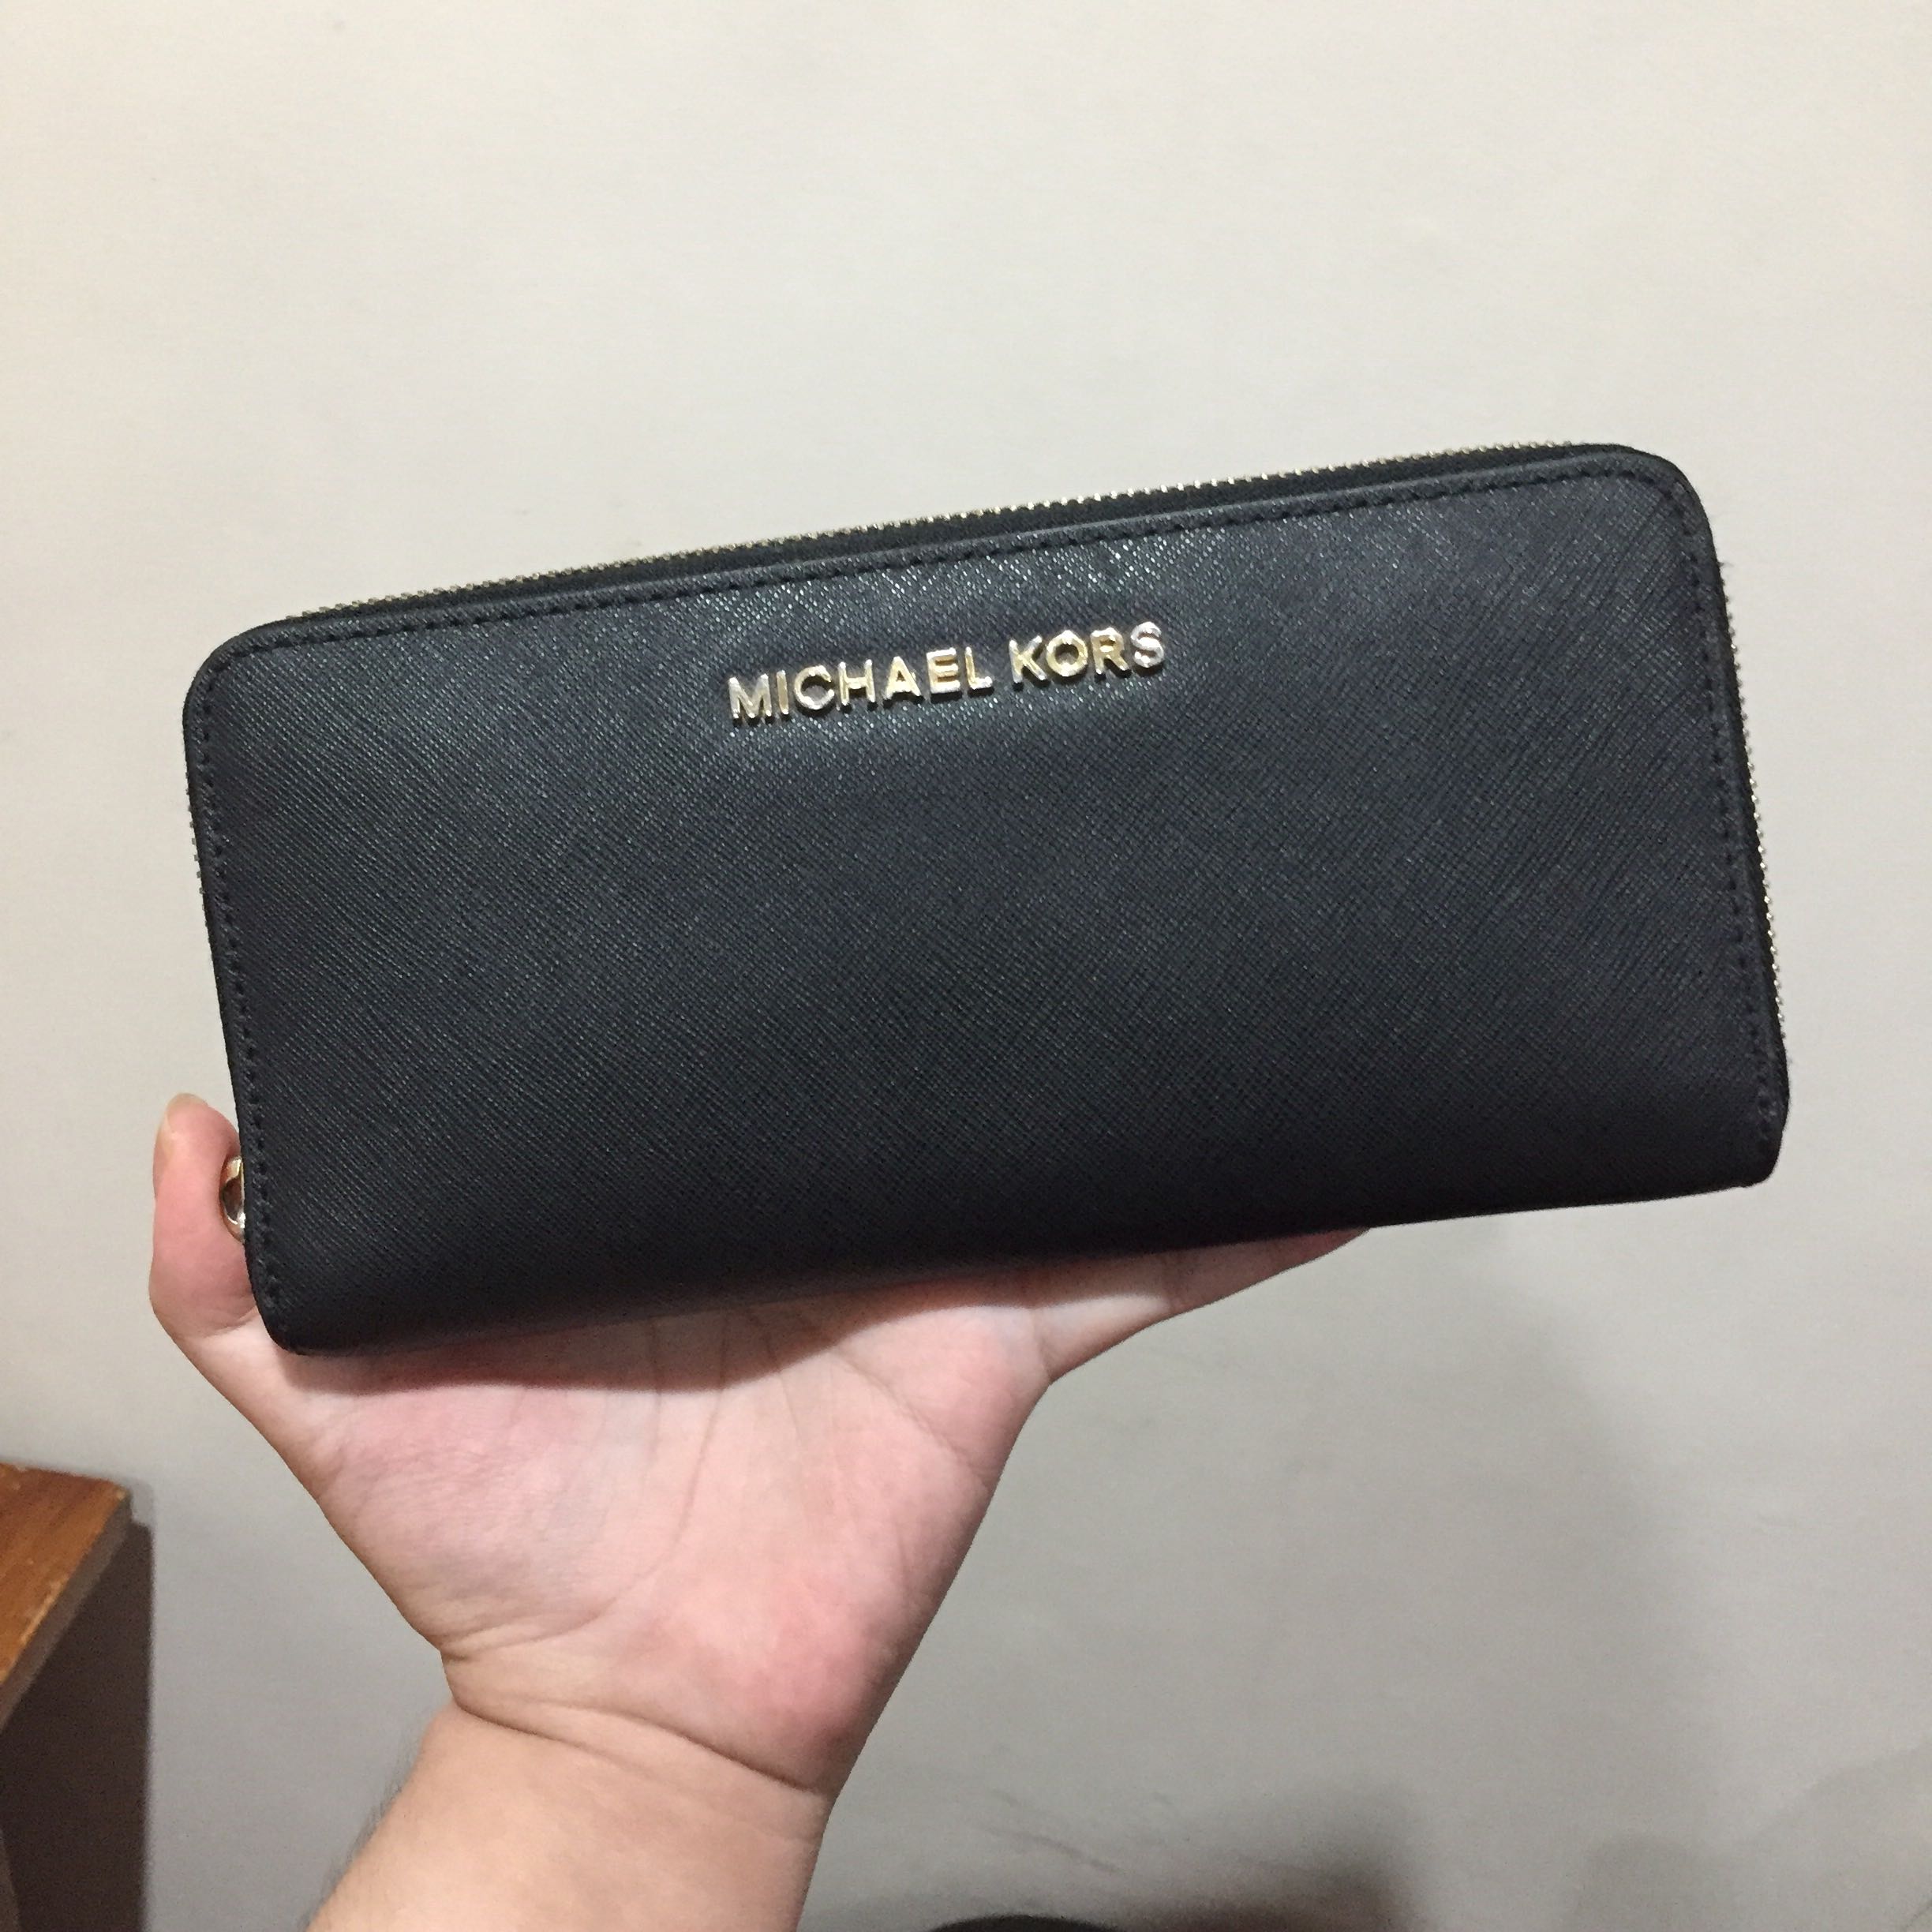 Michael Kors Saffiano Leather Large Multifunction Zip Around Wallet/Case  For For IPhone Plus, Plus, Plus, IPhone X, S7 S8 Edge S9 Edge 